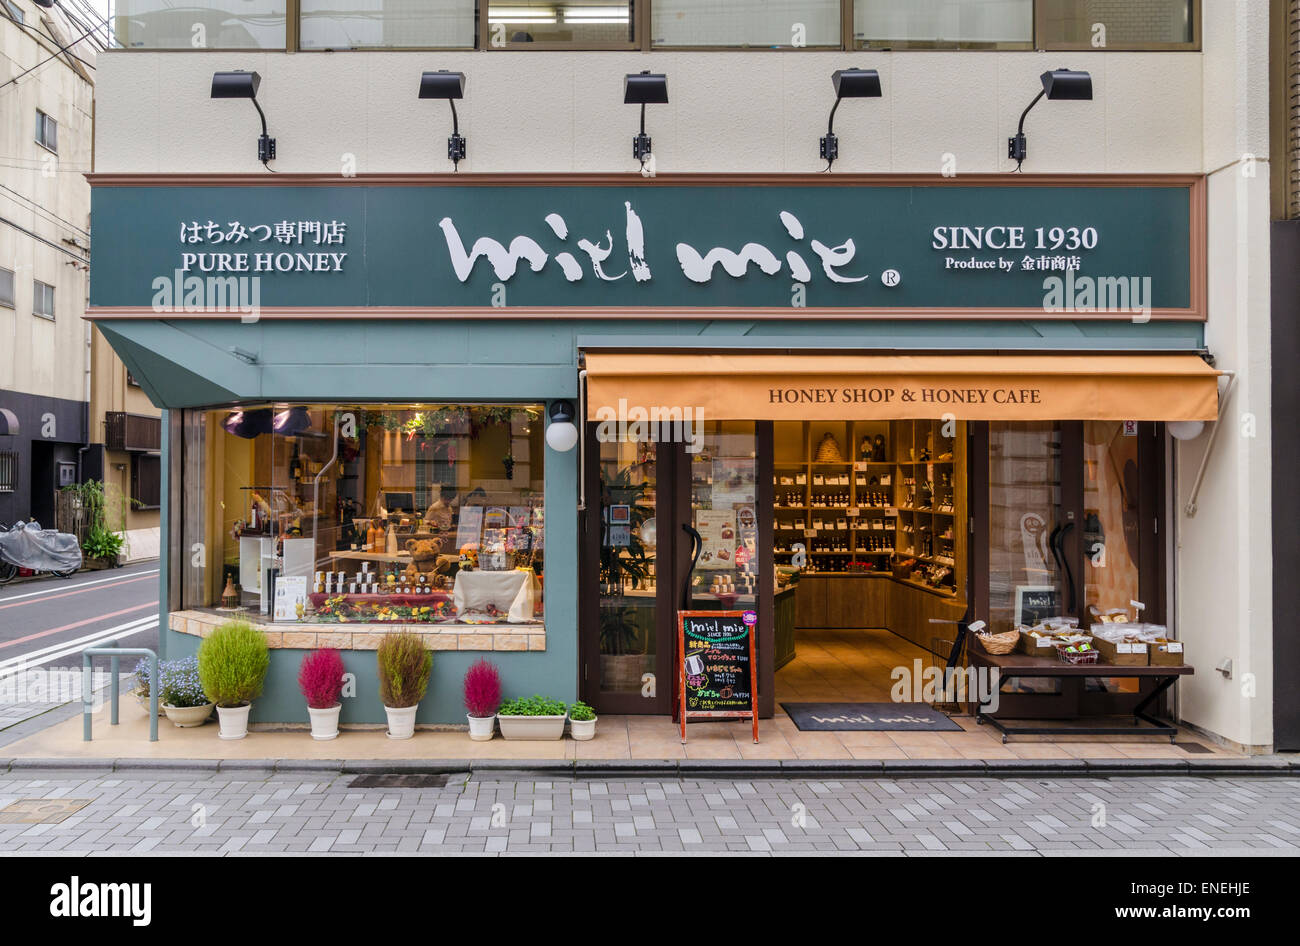 Facade of Miel Mie, a specialist honey products shop and cafe in Kyoto, Japan Stock Photo